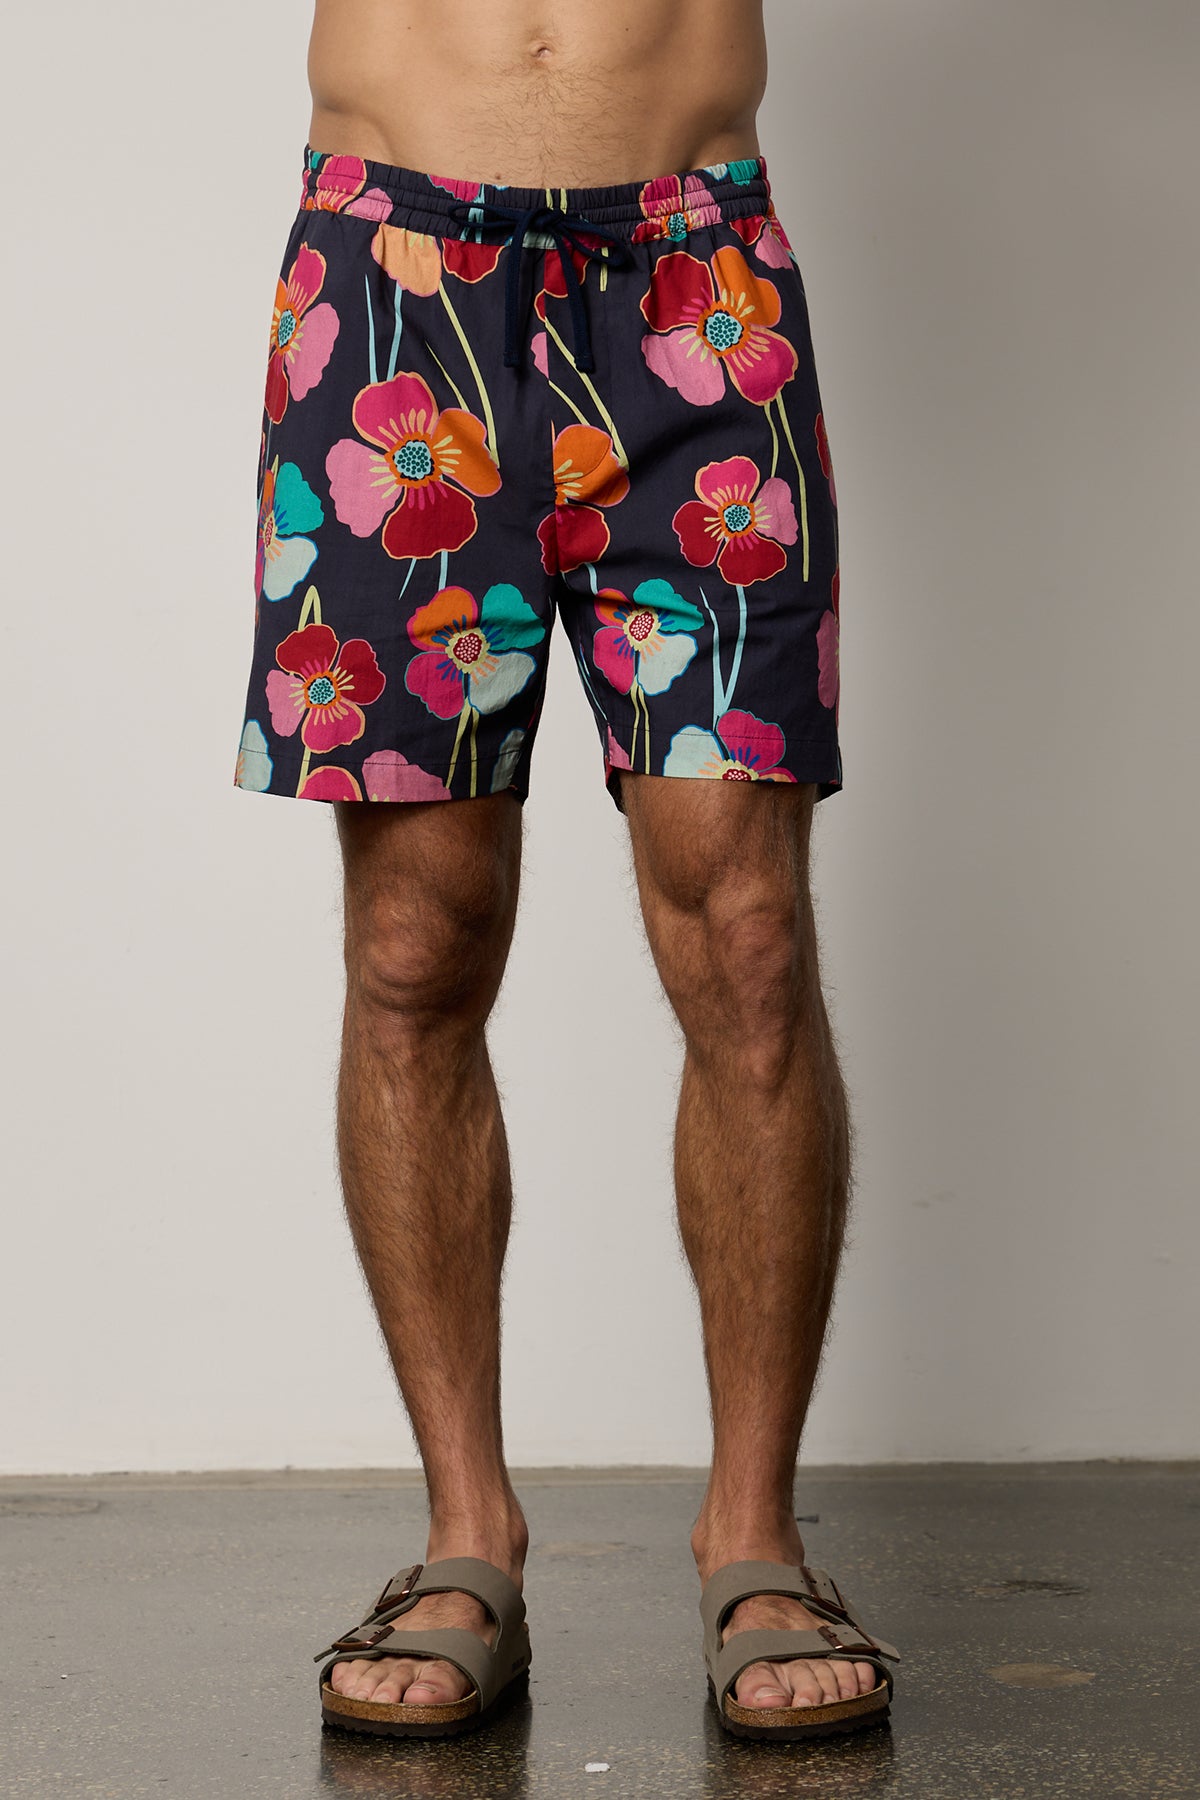 Colt Short front in bahama print with bold, multi colored floral pattern with dark background-26266340884673